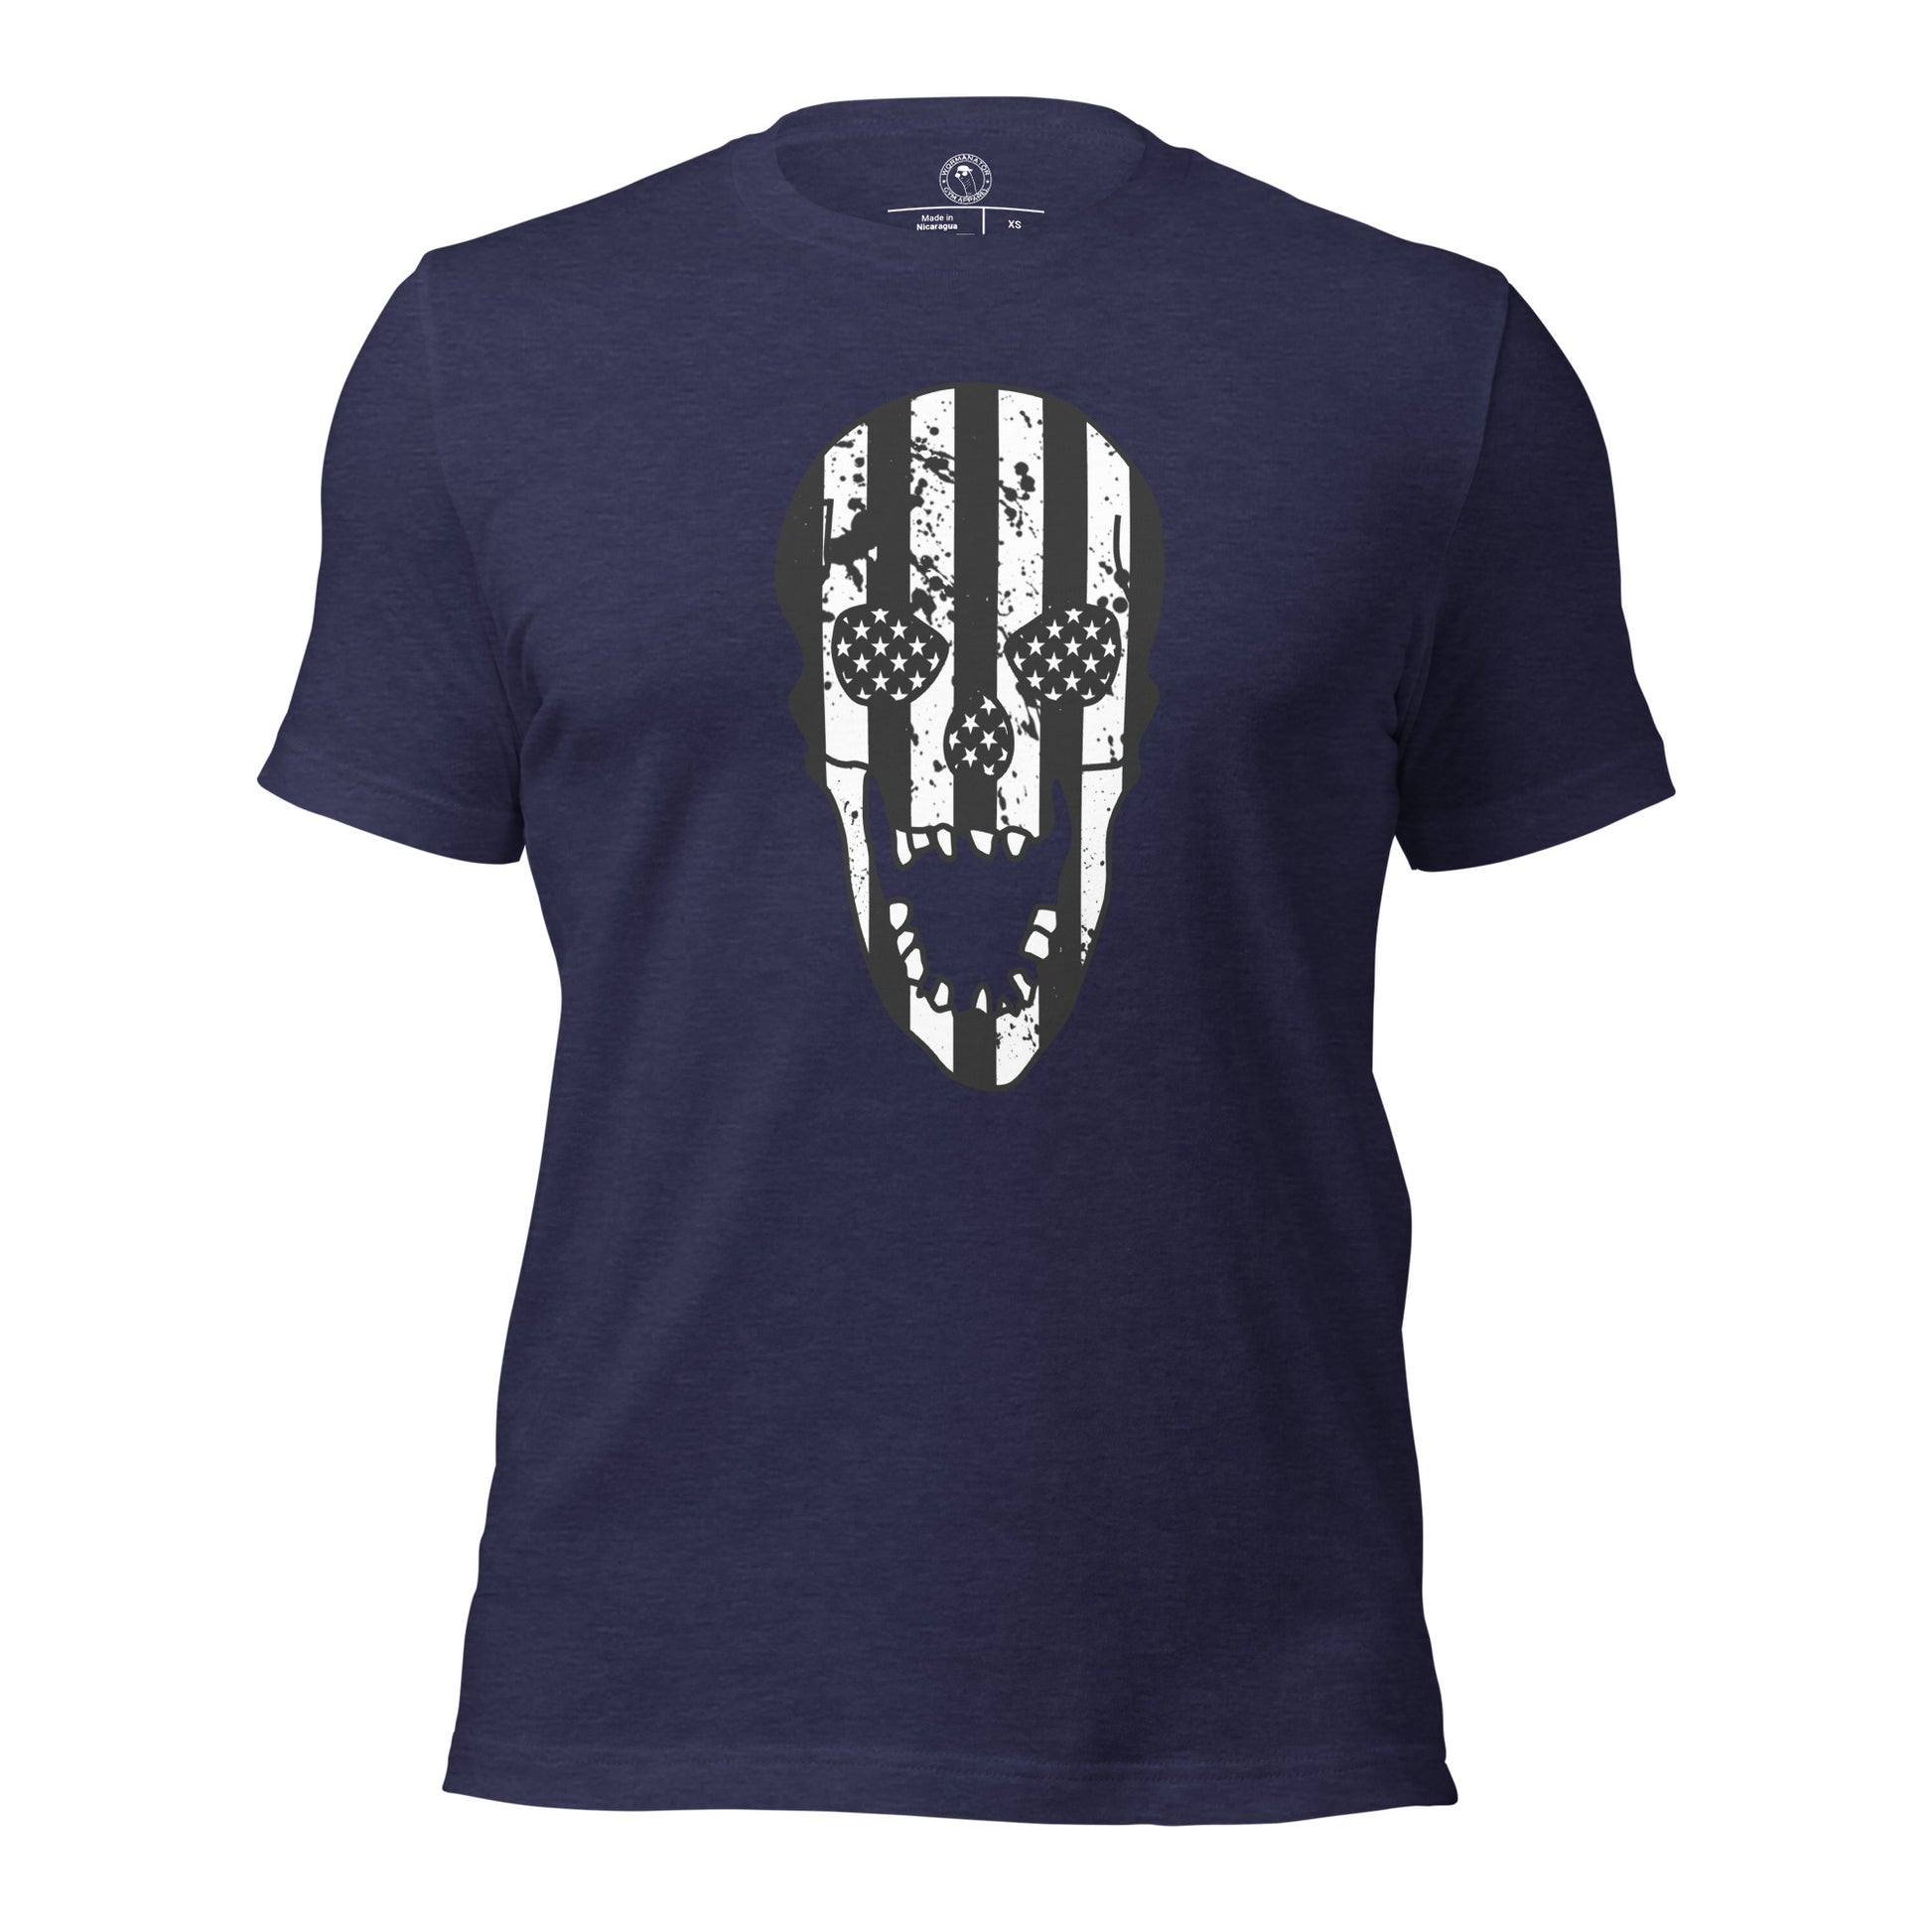 Blacked-Out USA Skull Shirt in Heather Midnight Navy